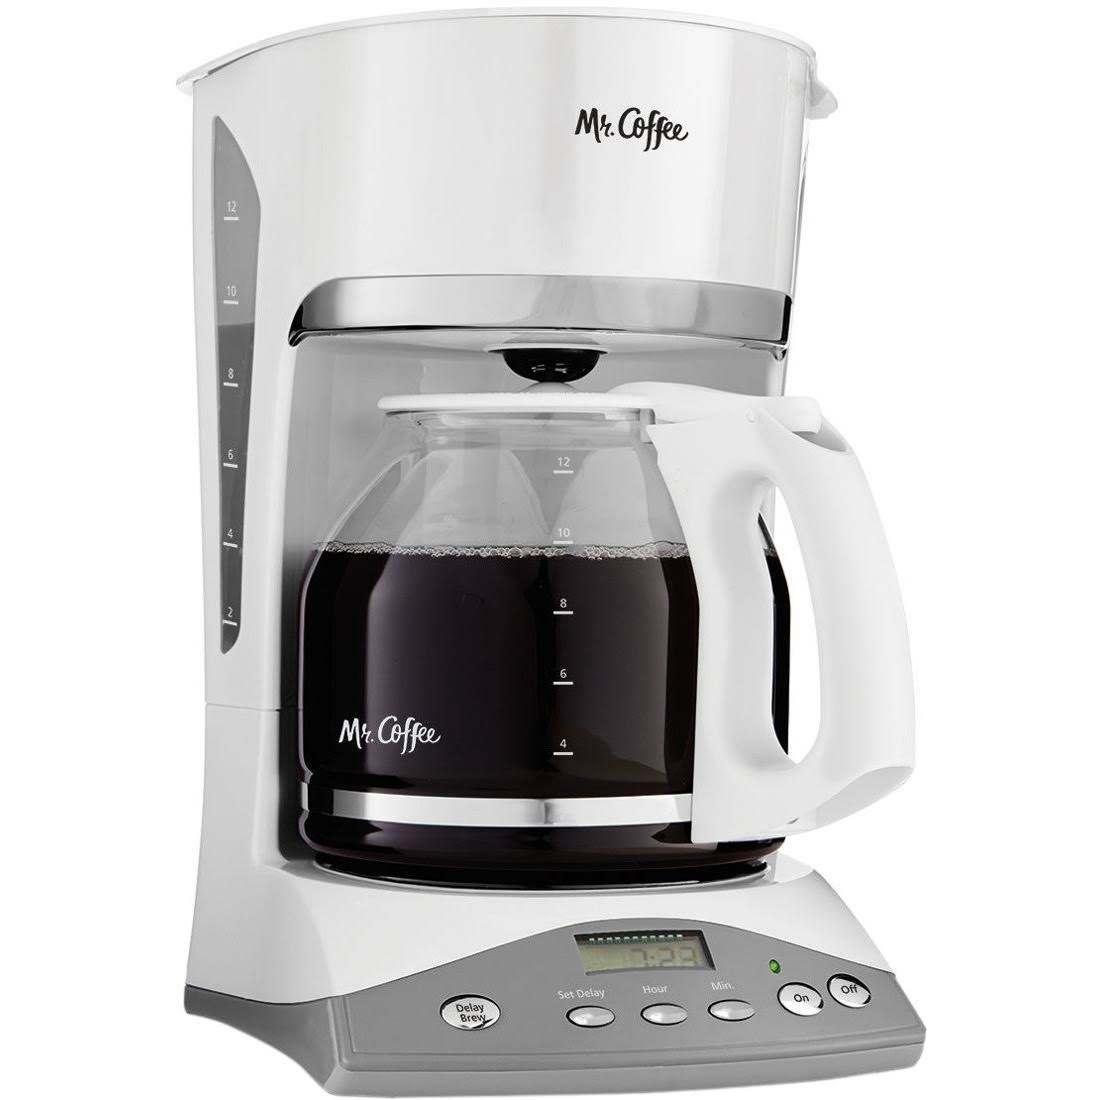 Mr. Coffee Programmable Coffeemaker - White, 12 Cup